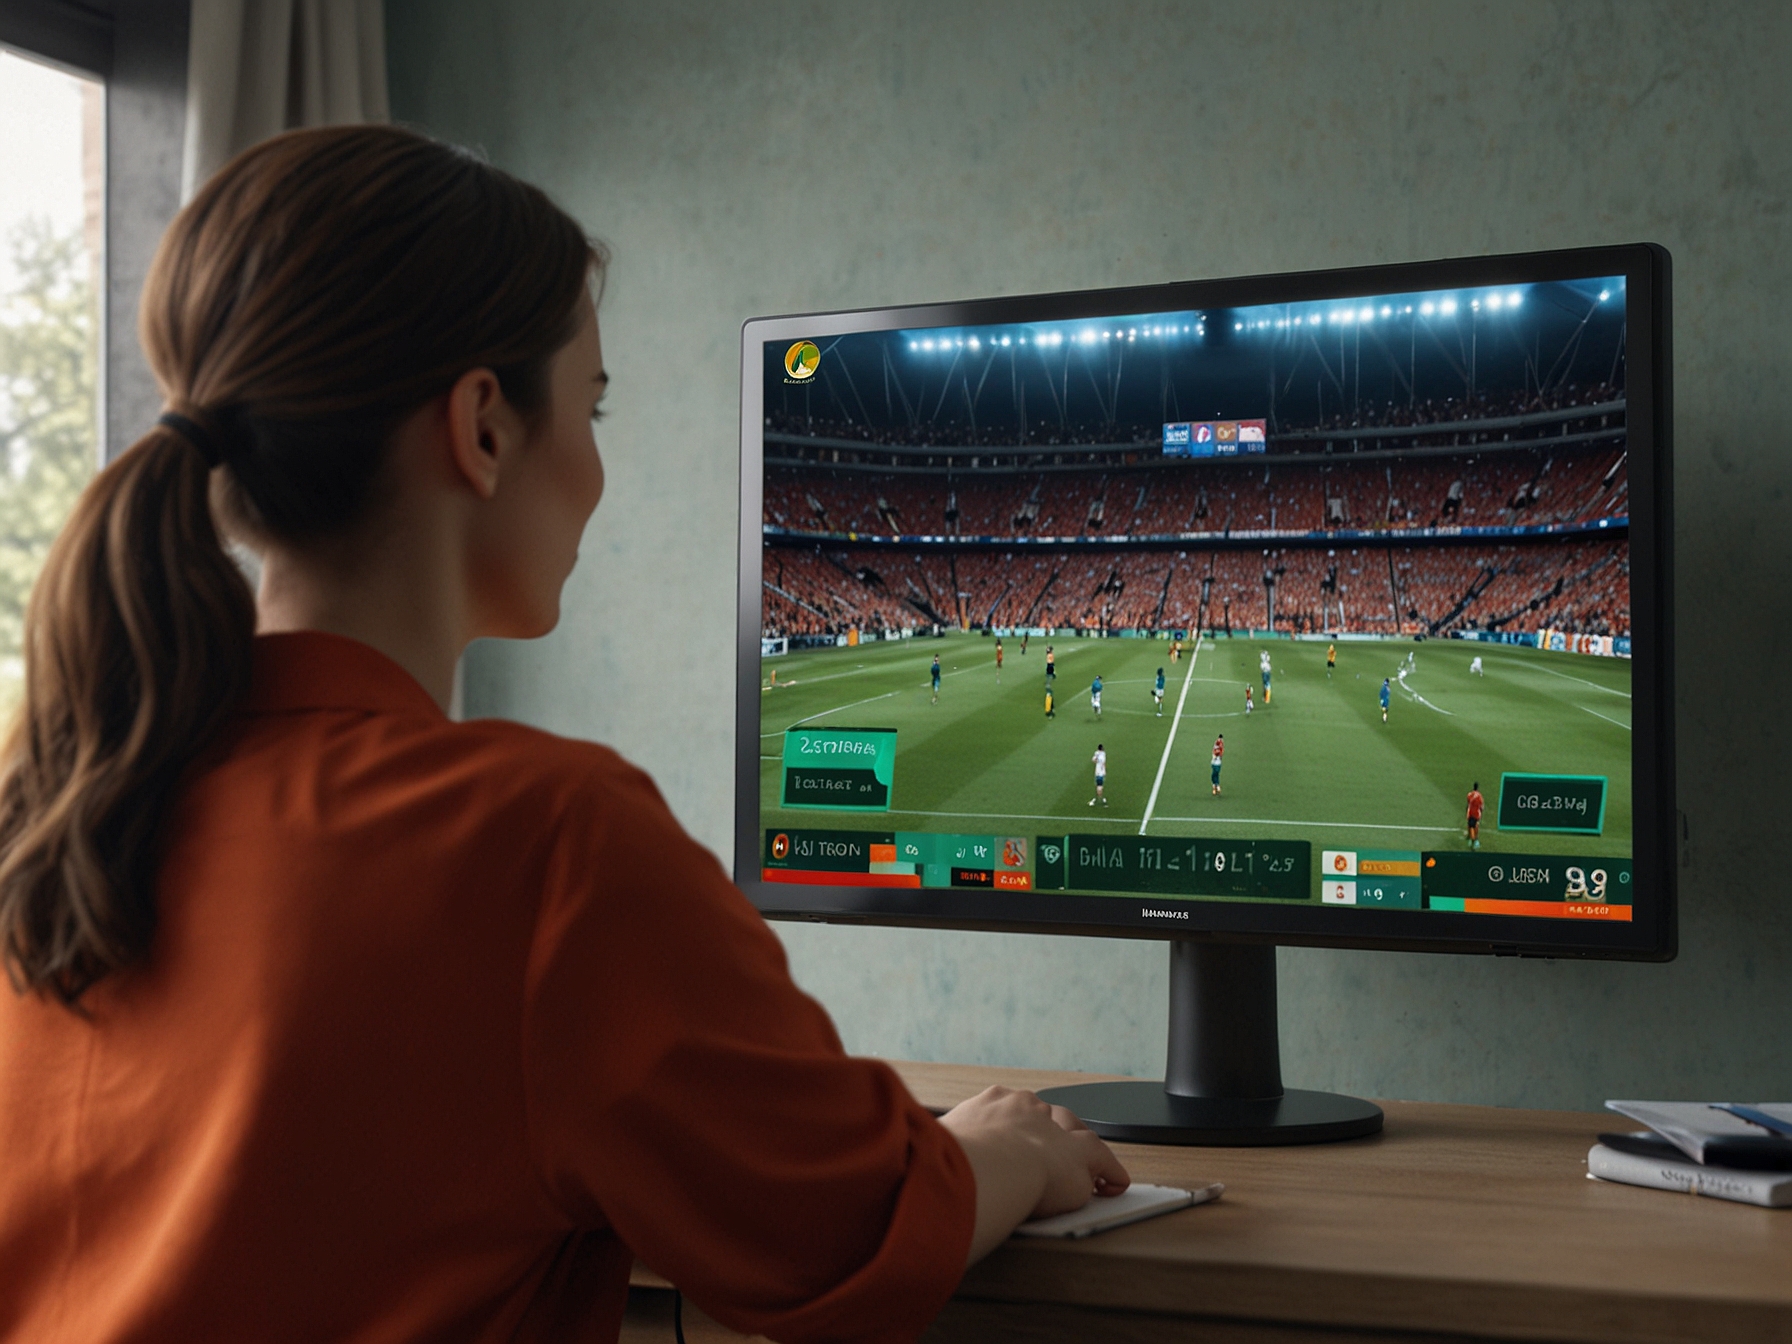 A high-resolution Hisense screen displaying a football match with the VAR system in action, illustrating the brand's advanced technology used at UEFA EURO 2024 to ensure accurate refereeing decisions.